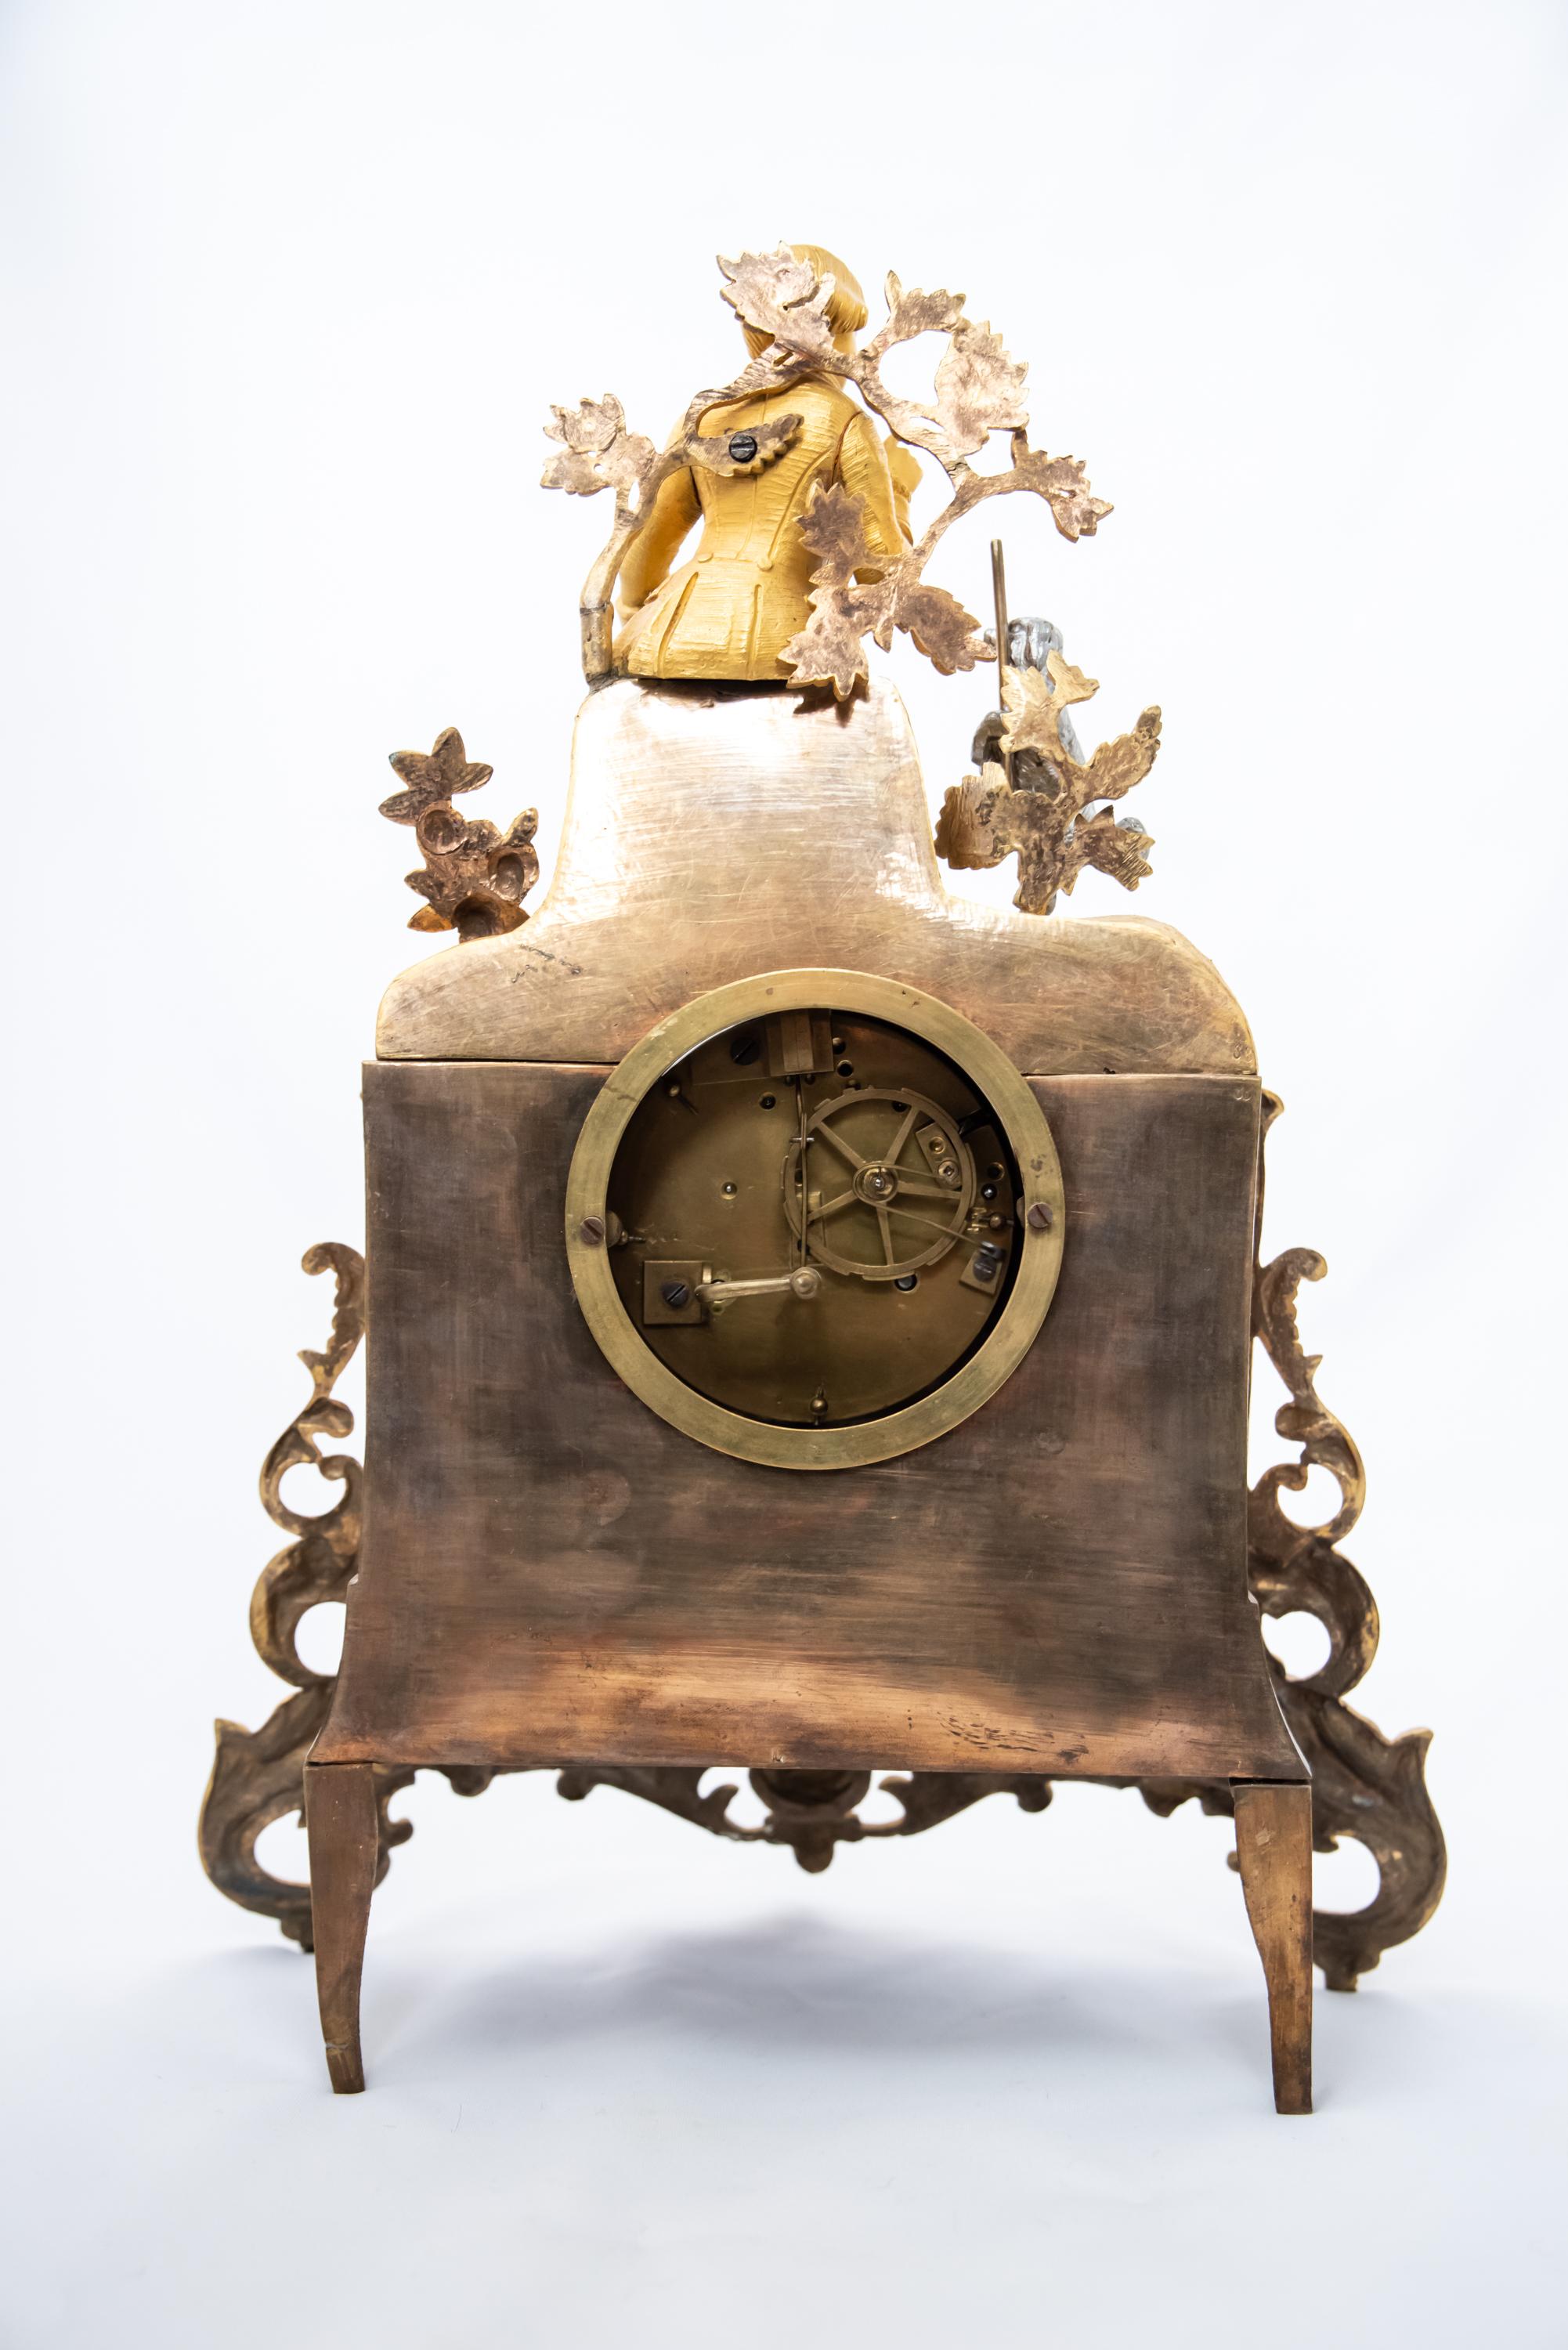 A Boy and His Dog, 19th Century French Fire-Gilt Bronze Clock In Good Condition For Sale In 263-0031, JP